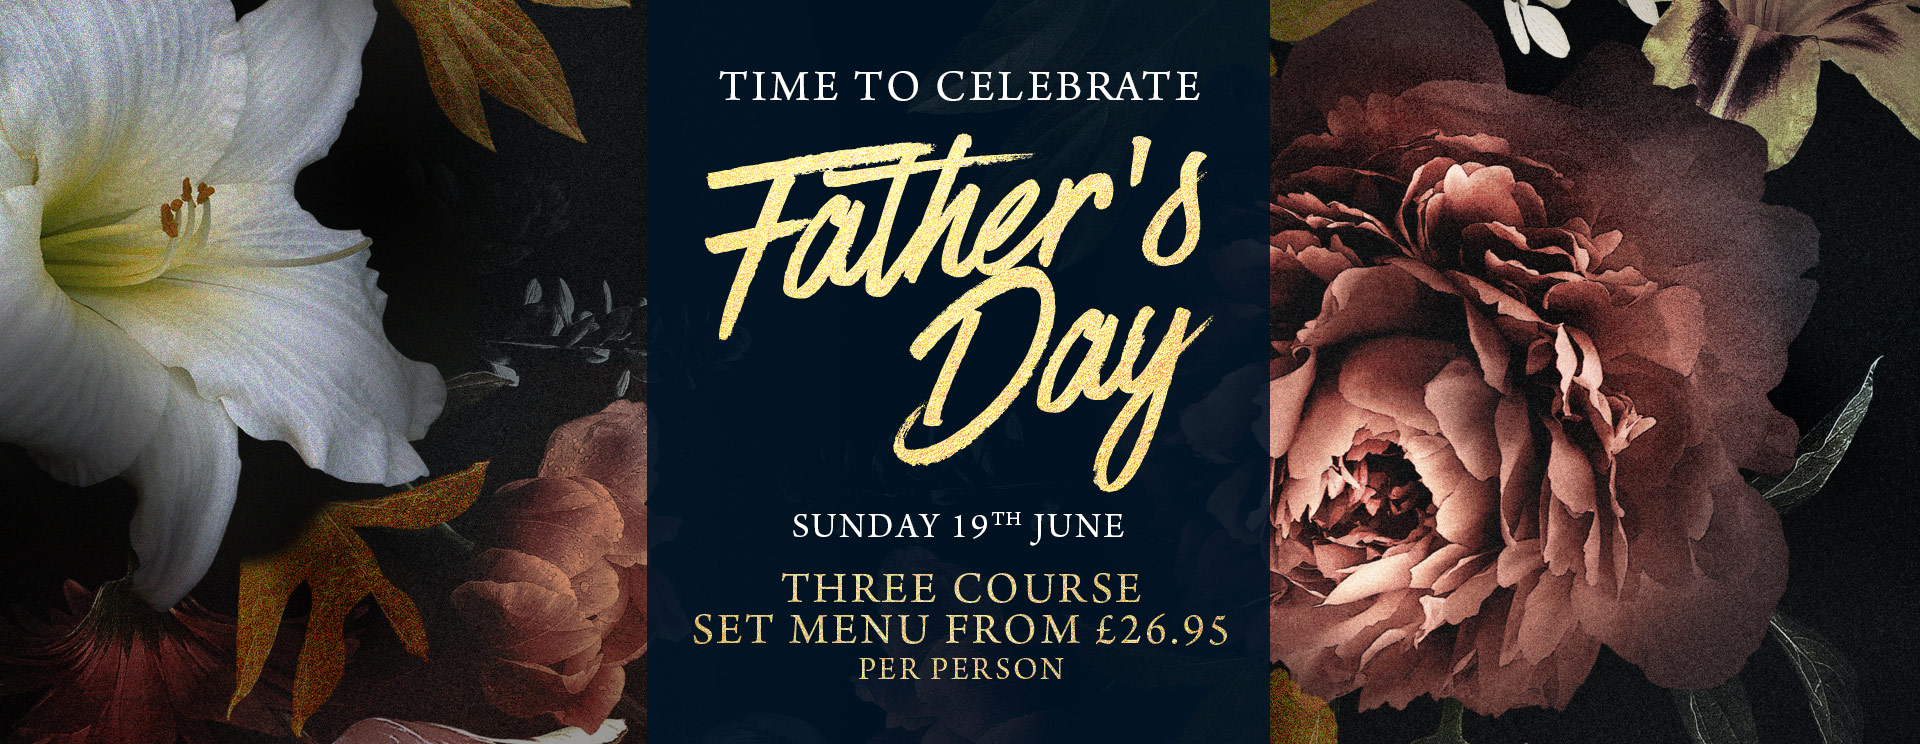 Fathers Day at The Langton